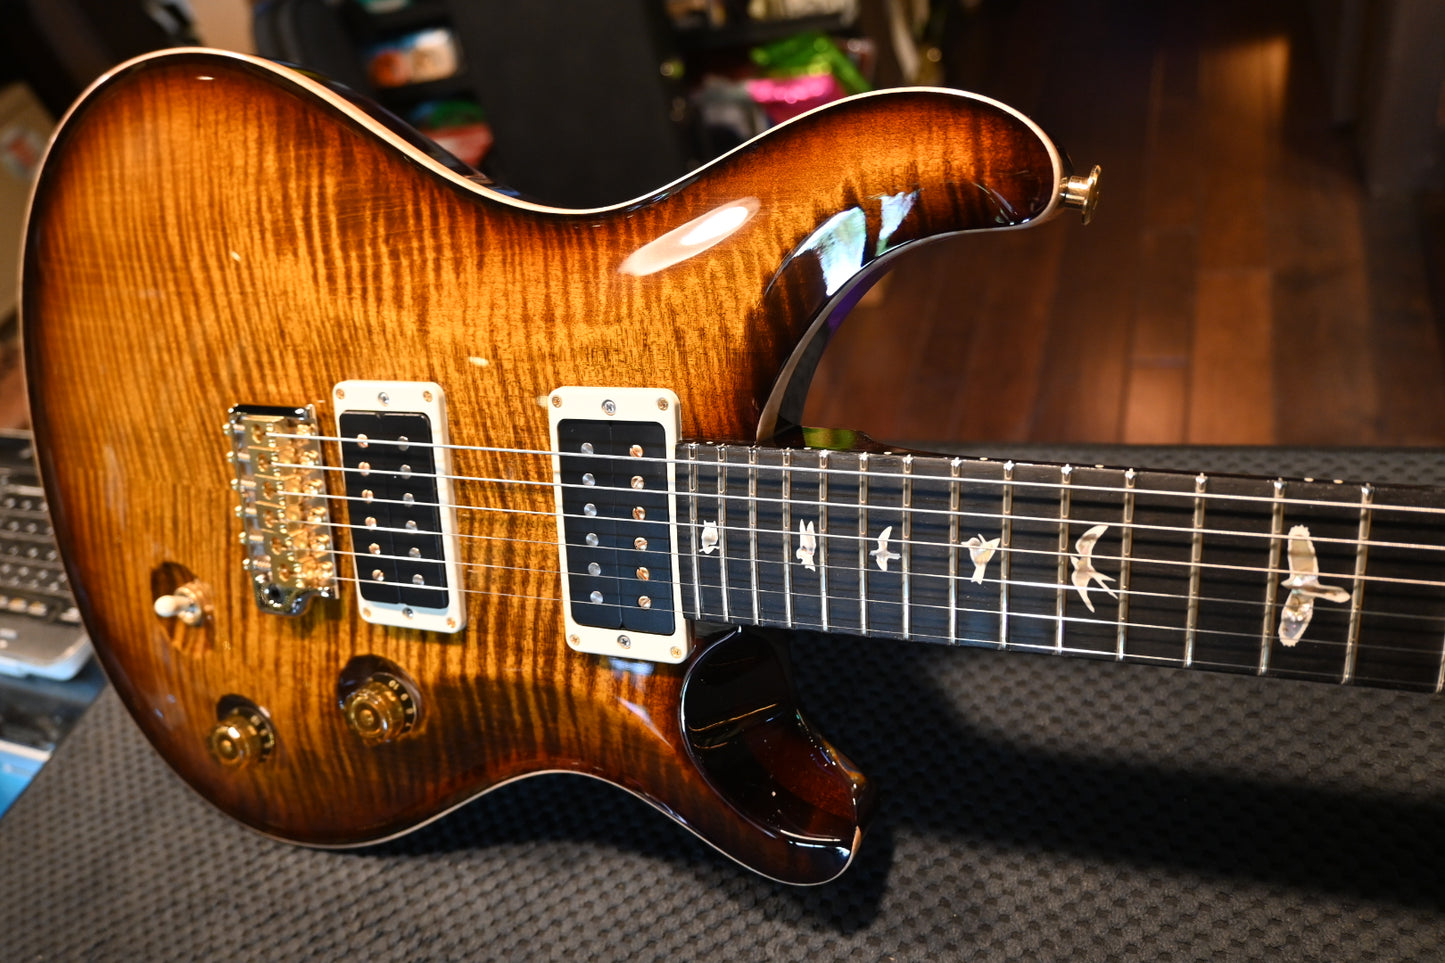 PRS Paul Reed Smith Custom 24 10-Top Curly Maple Stained Neck - Black Gold Burst #1887 - Danville Music